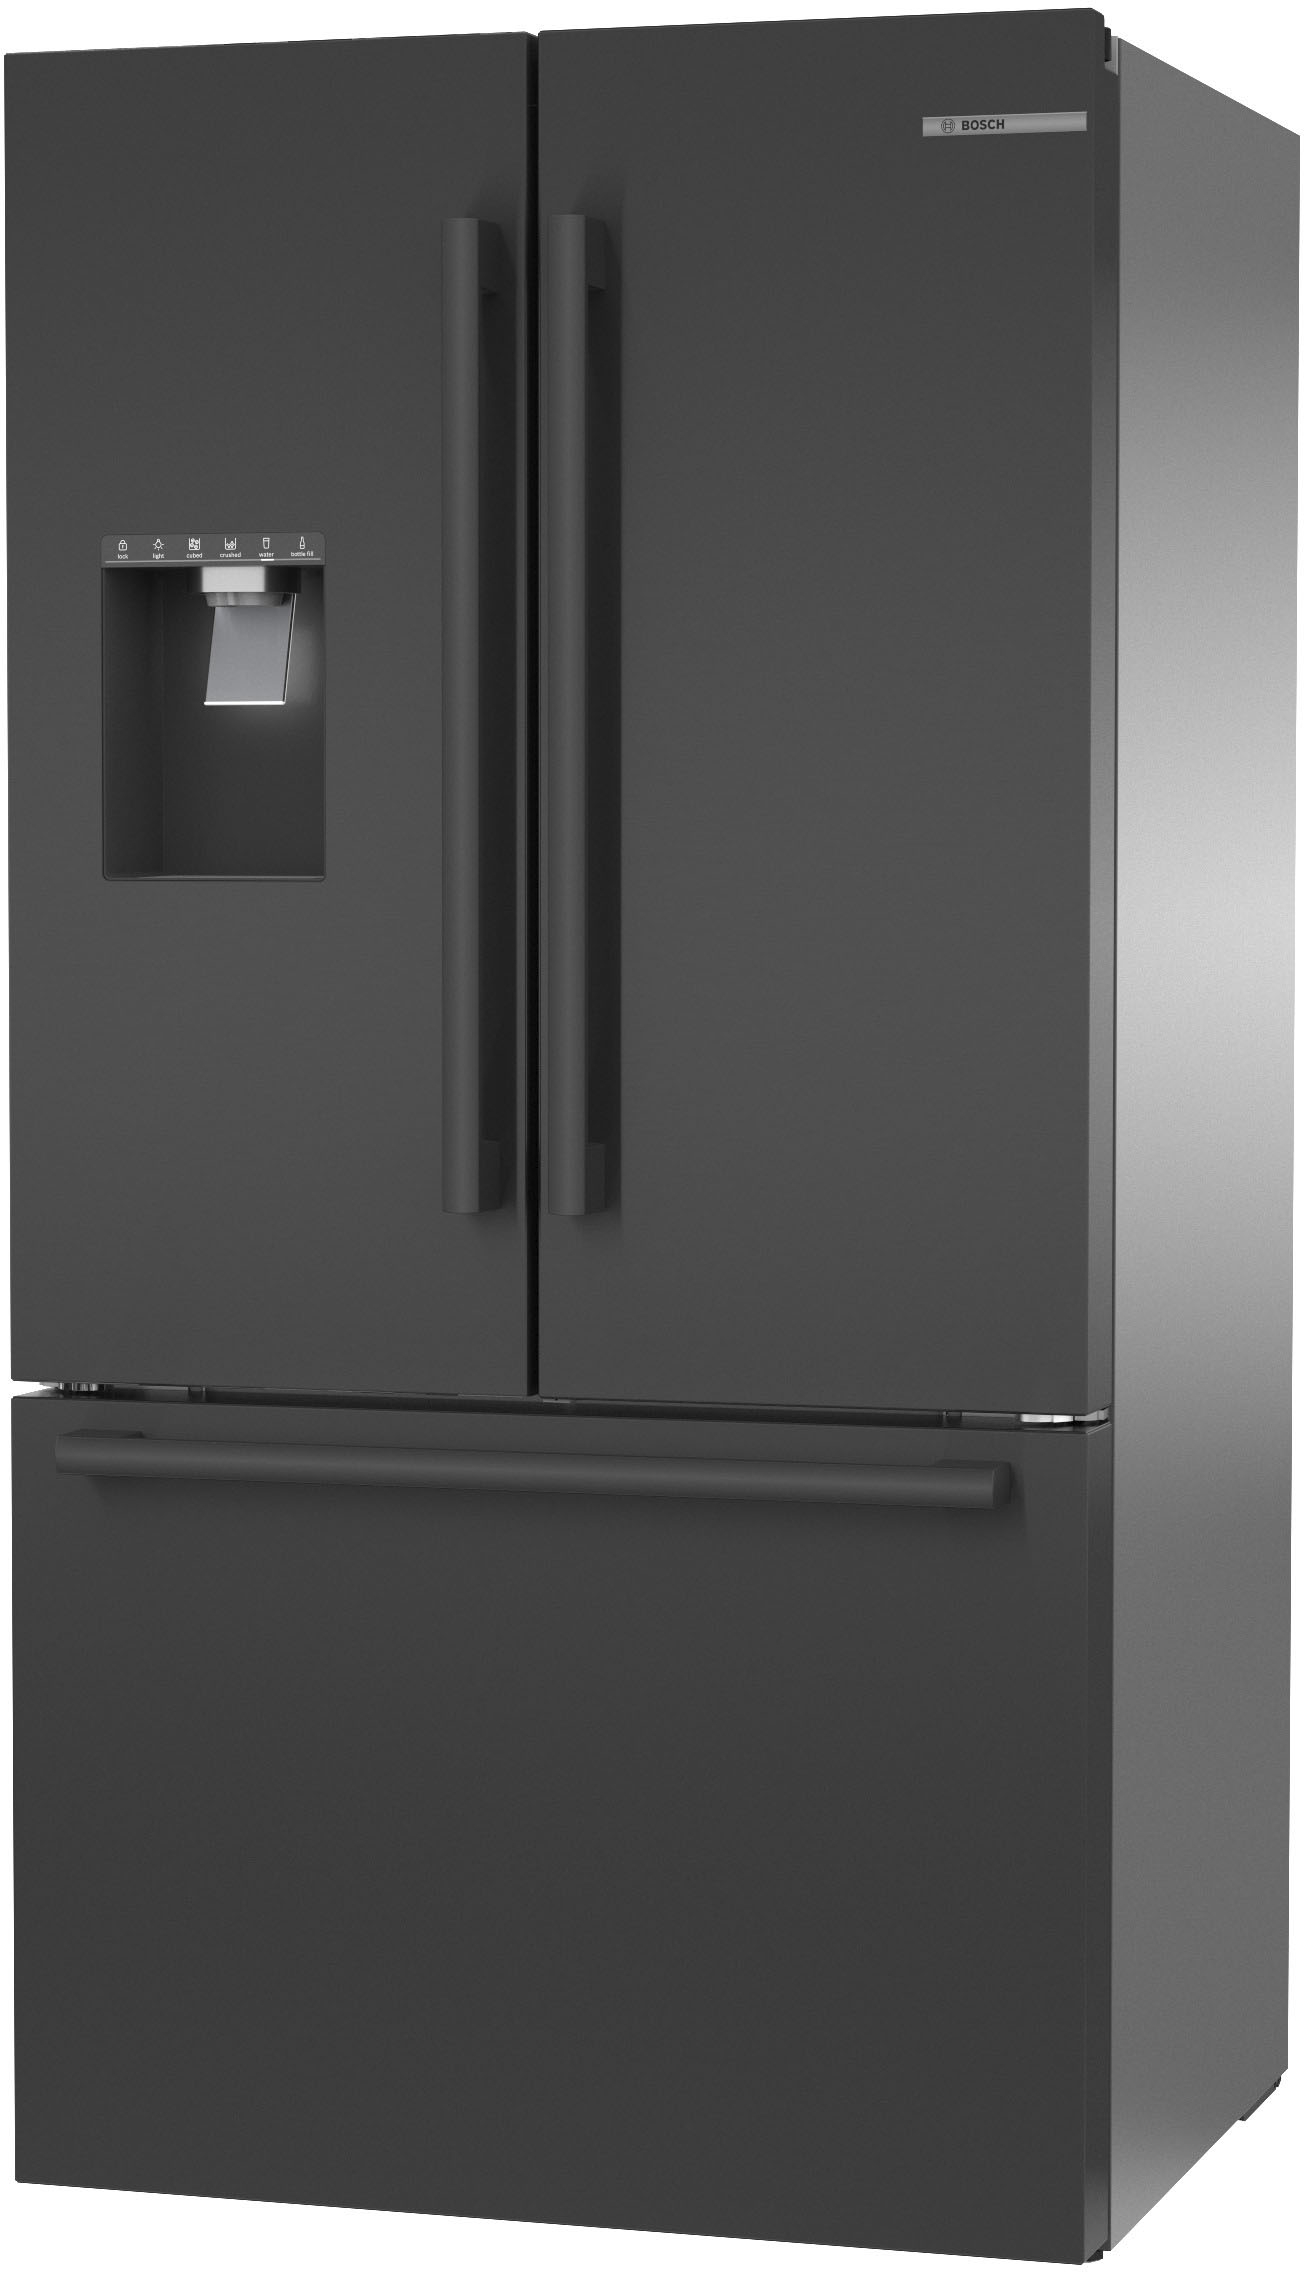 Left View: KitchenAid - 21.9 Cu. Ft. French Door Counter-Depth Refrigerator - Black Stainless Steel